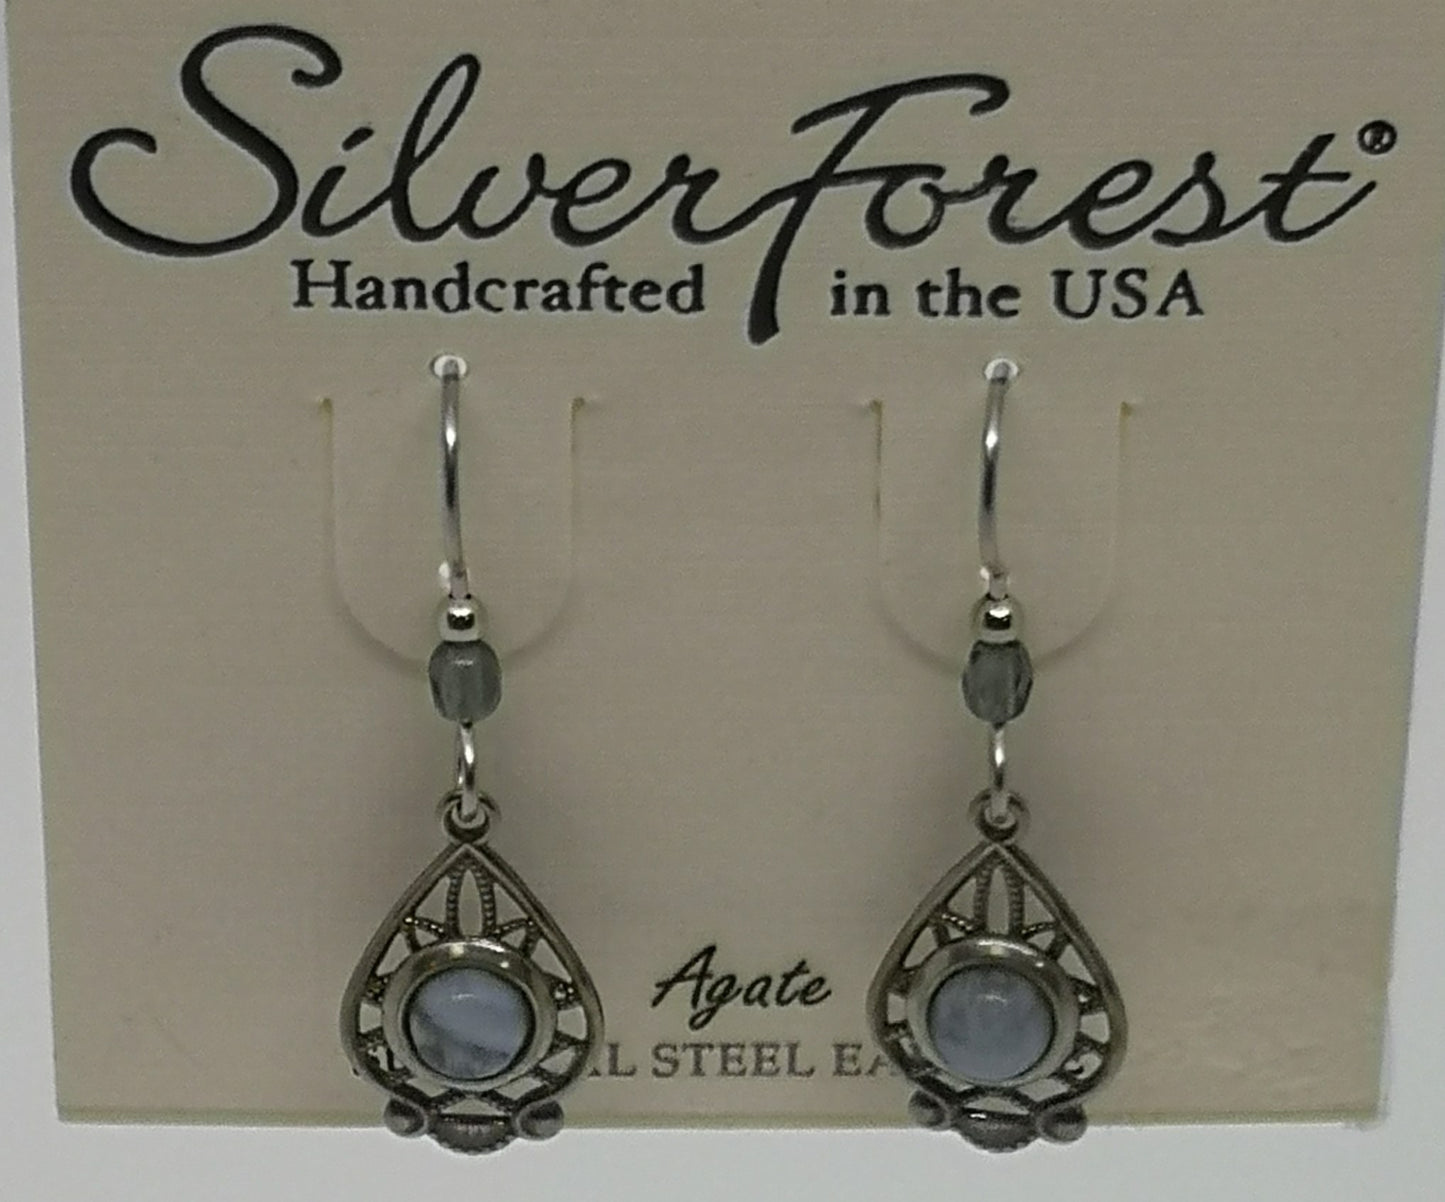 Silver forest surgical steel Agate earrings